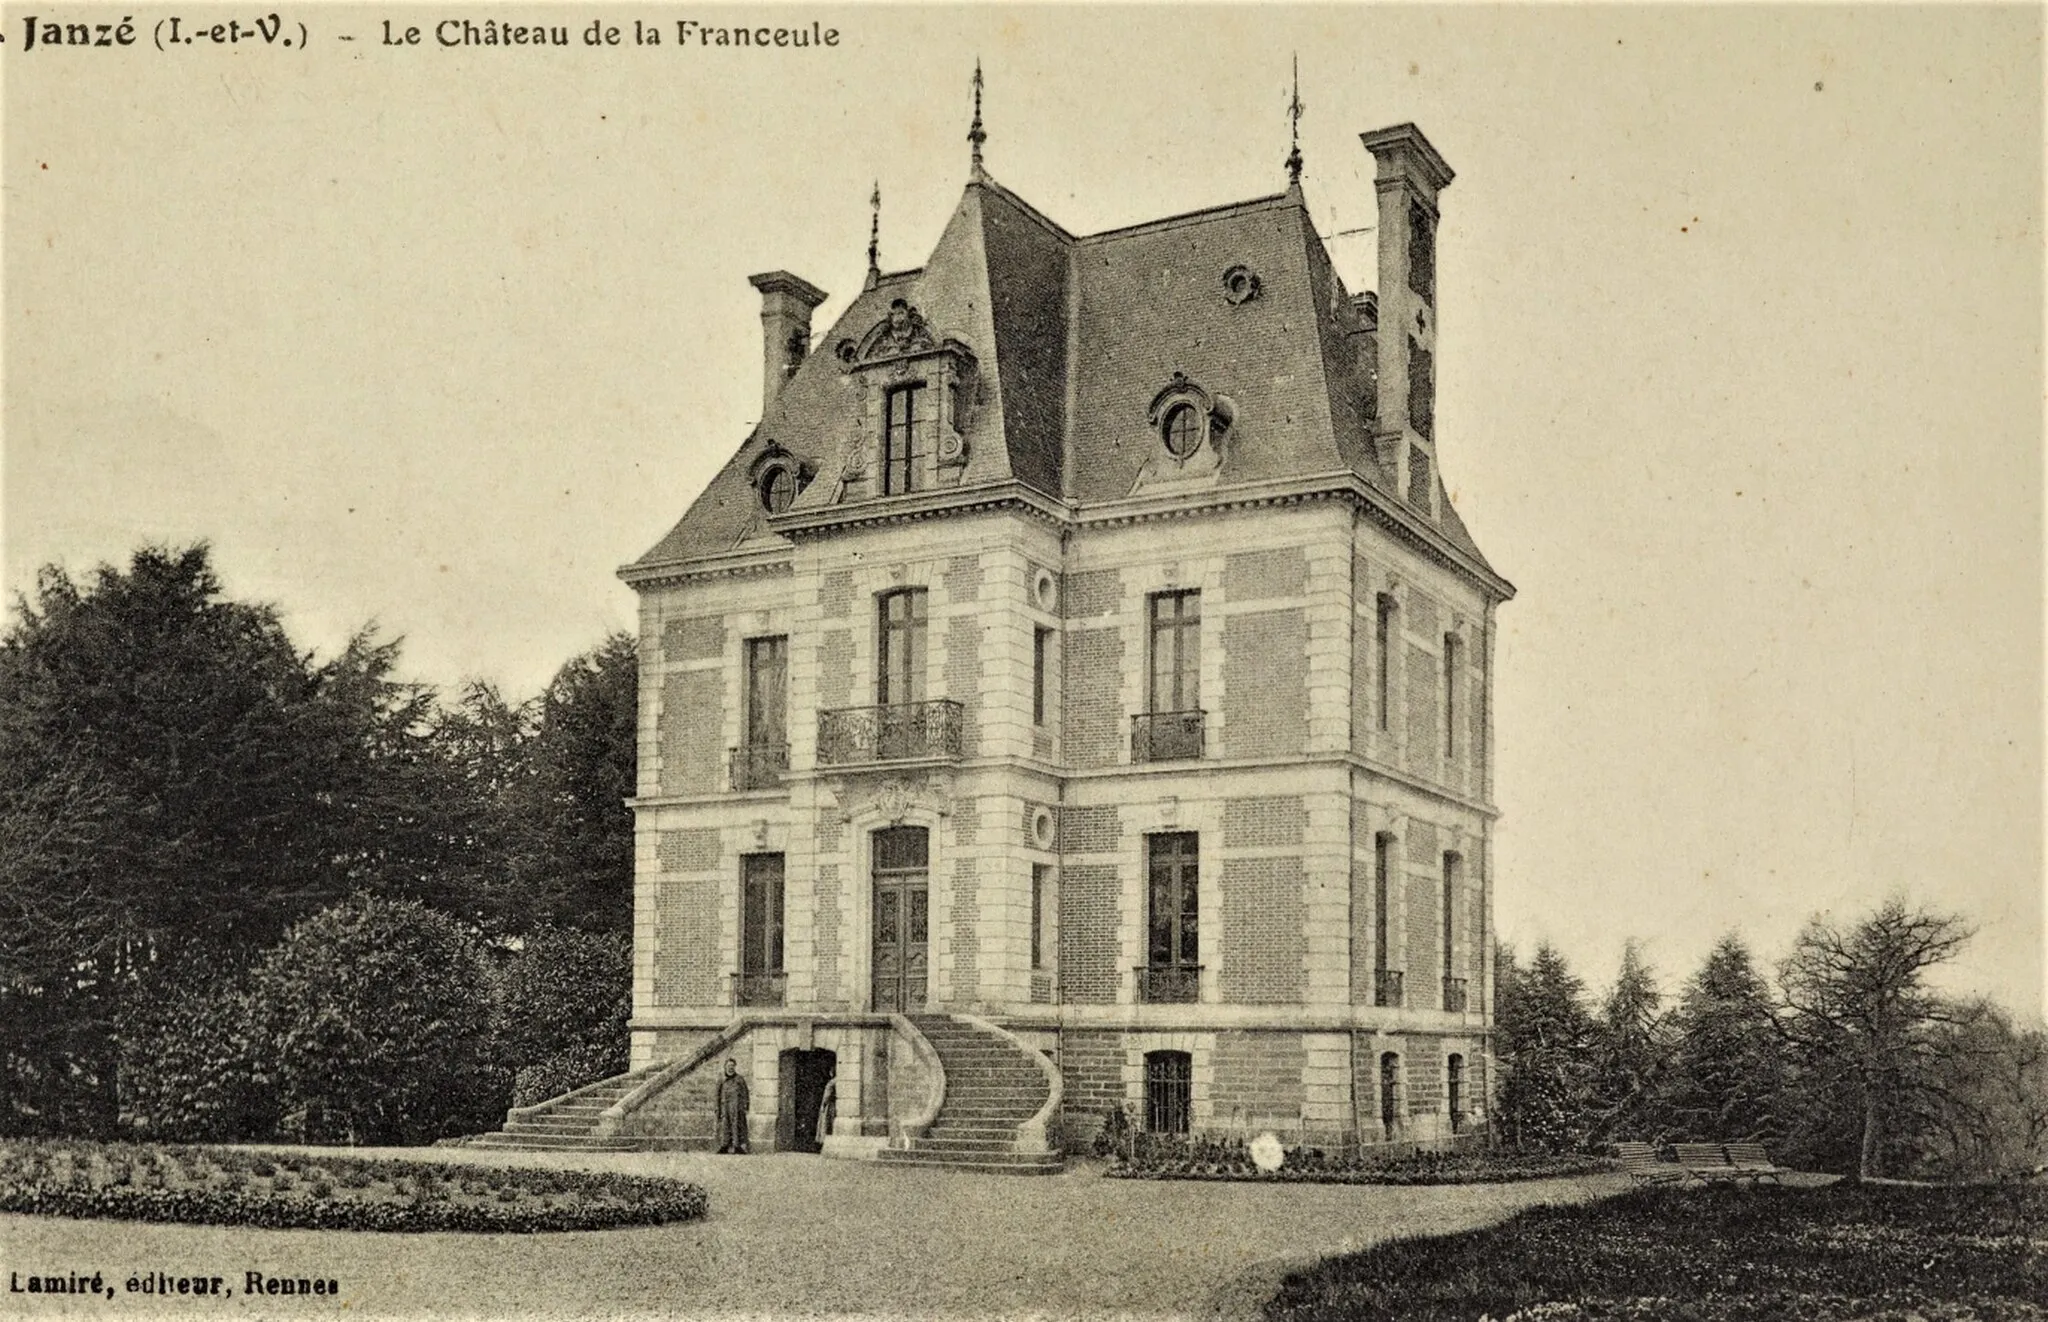 Photo showing: Postcard; photo taken before 1909; copy with correspondence dated 23 August 1908 and postage stamp shows Editions E. Mary-Rousselière  [

This object can be found on the documentary portal of the Museum of Brittany and the Bintinais ecomuseum. It is under the identifier FLMjo184677.
brezhoneg ∙ English ∙ français ∙ Tiếng Việt ∙ +/−

] The plain undated identical photo at the Musée de Bretagne is from a later republication by A. Lamiré, who acquired the business of Mary-Rousselière in the 1920s. [1]